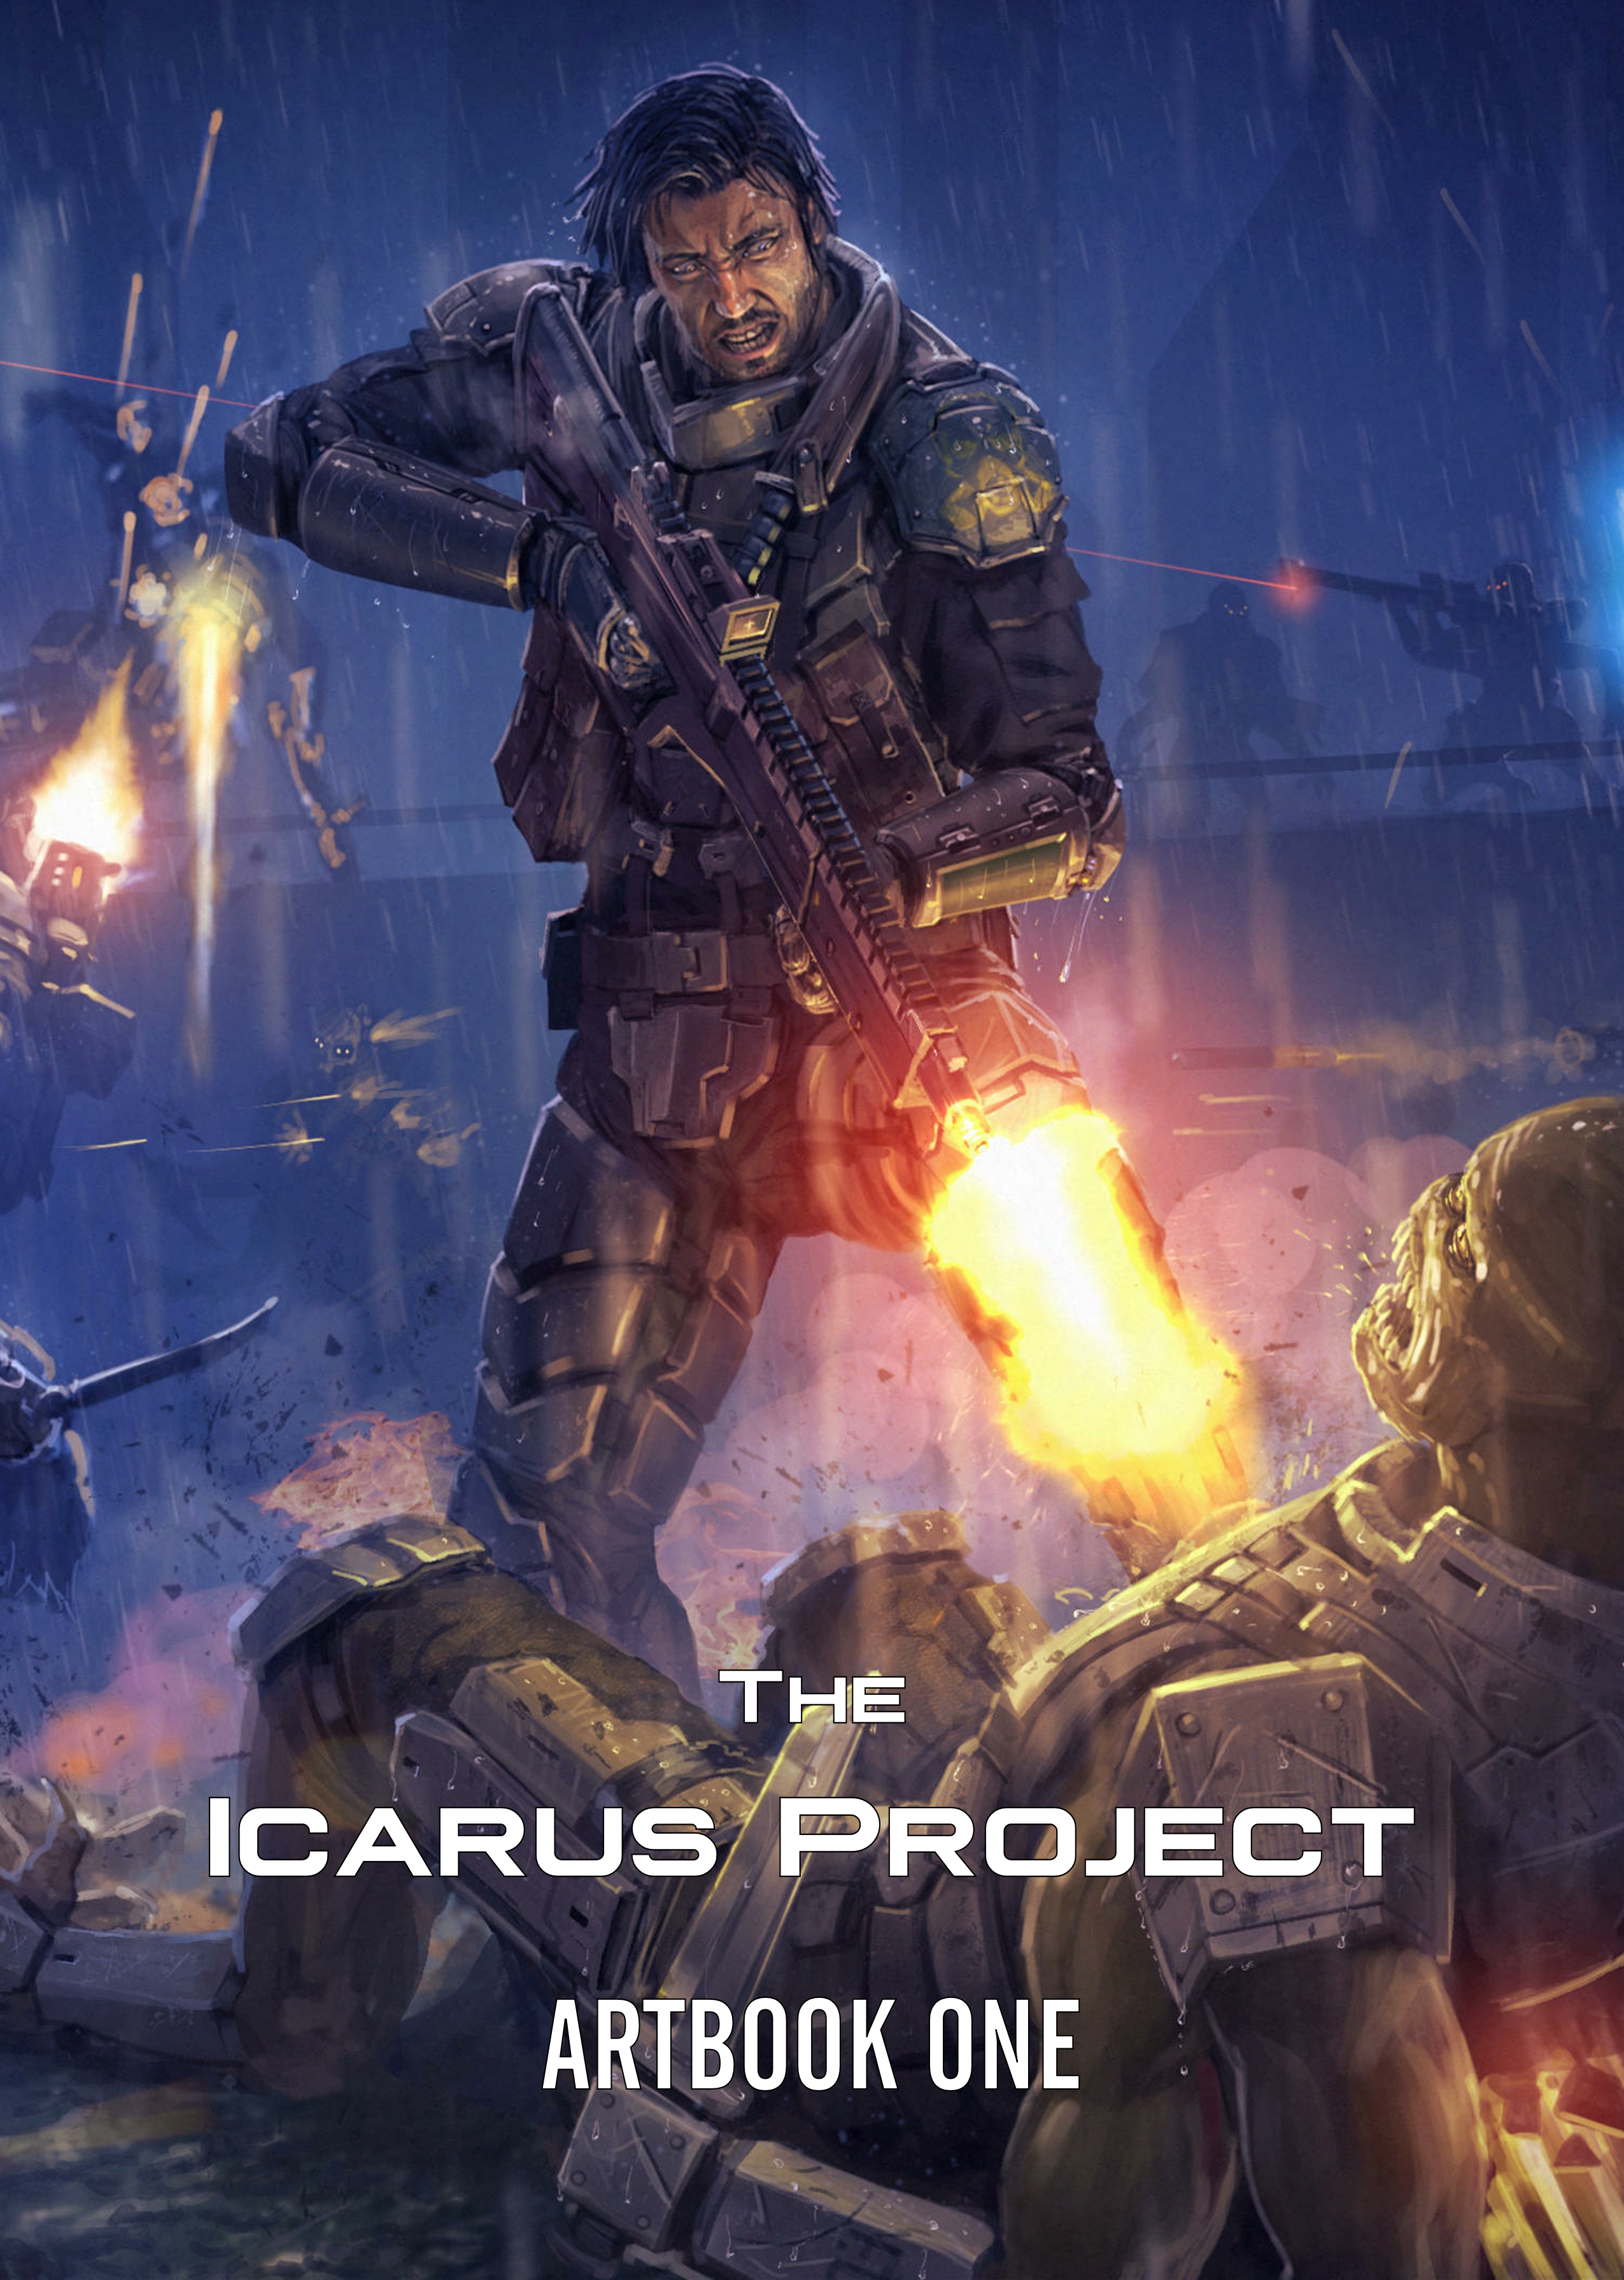 More Freebies up for grabs on the Icarus Project Kickstarter